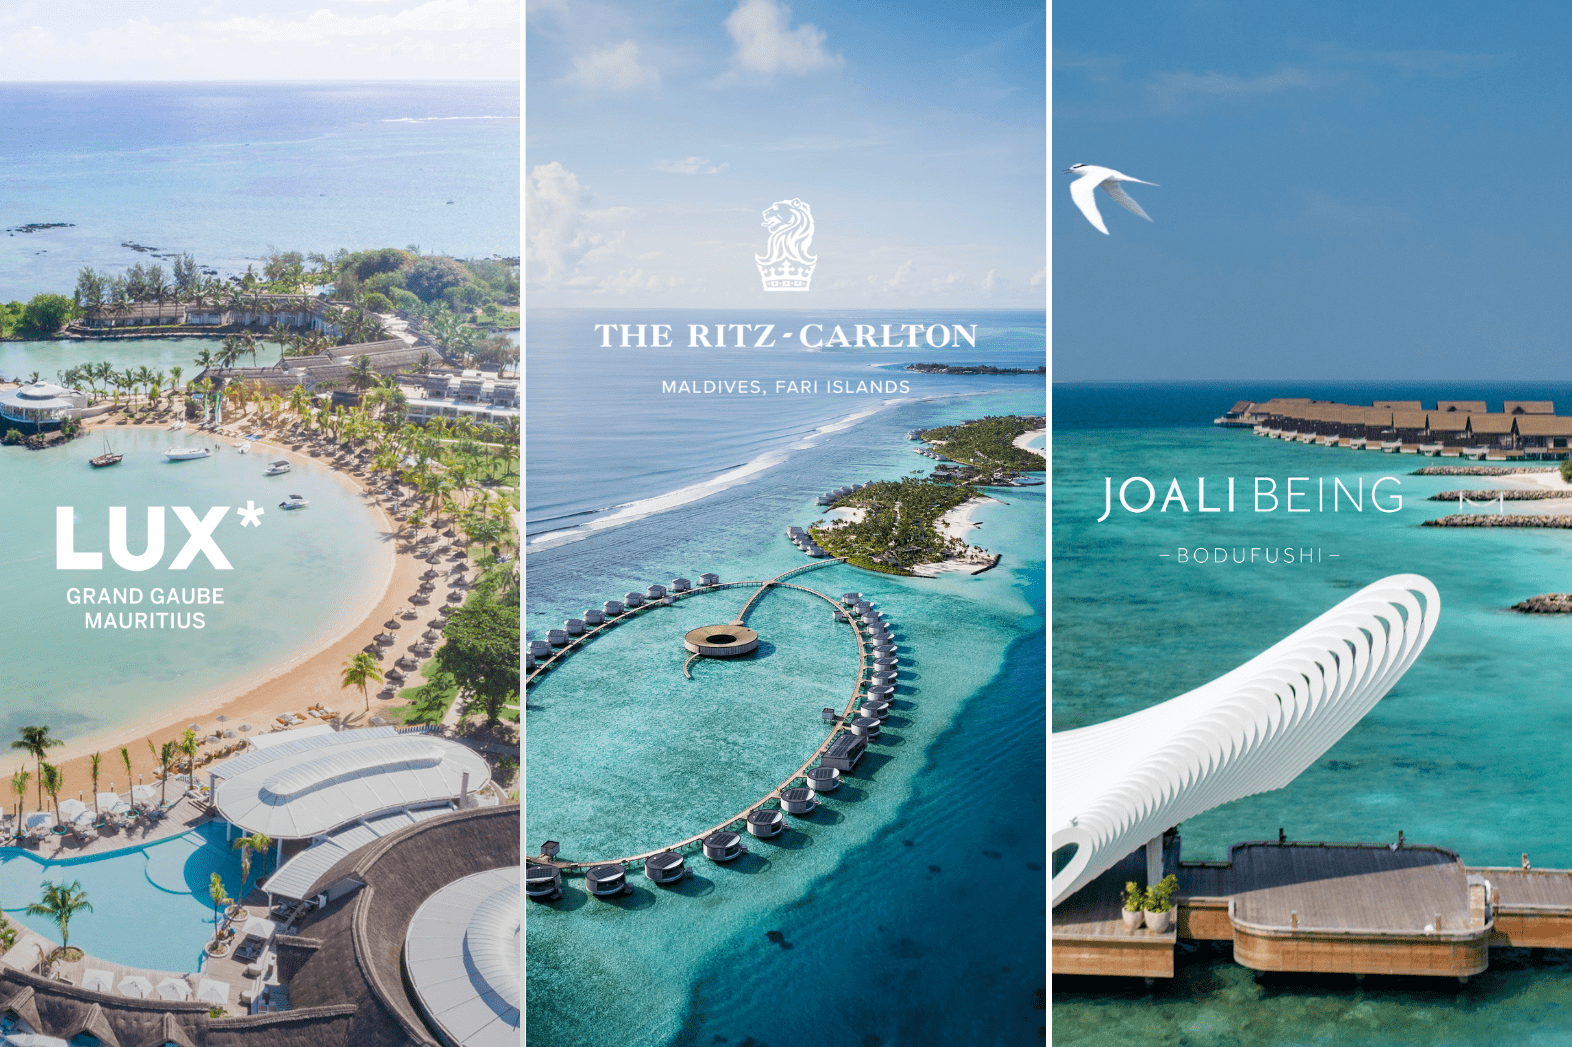 Highlights of the Month: LUX* Grand Gaube Mauritius, The Ritz-Carlton Maldives & JOALI BEING